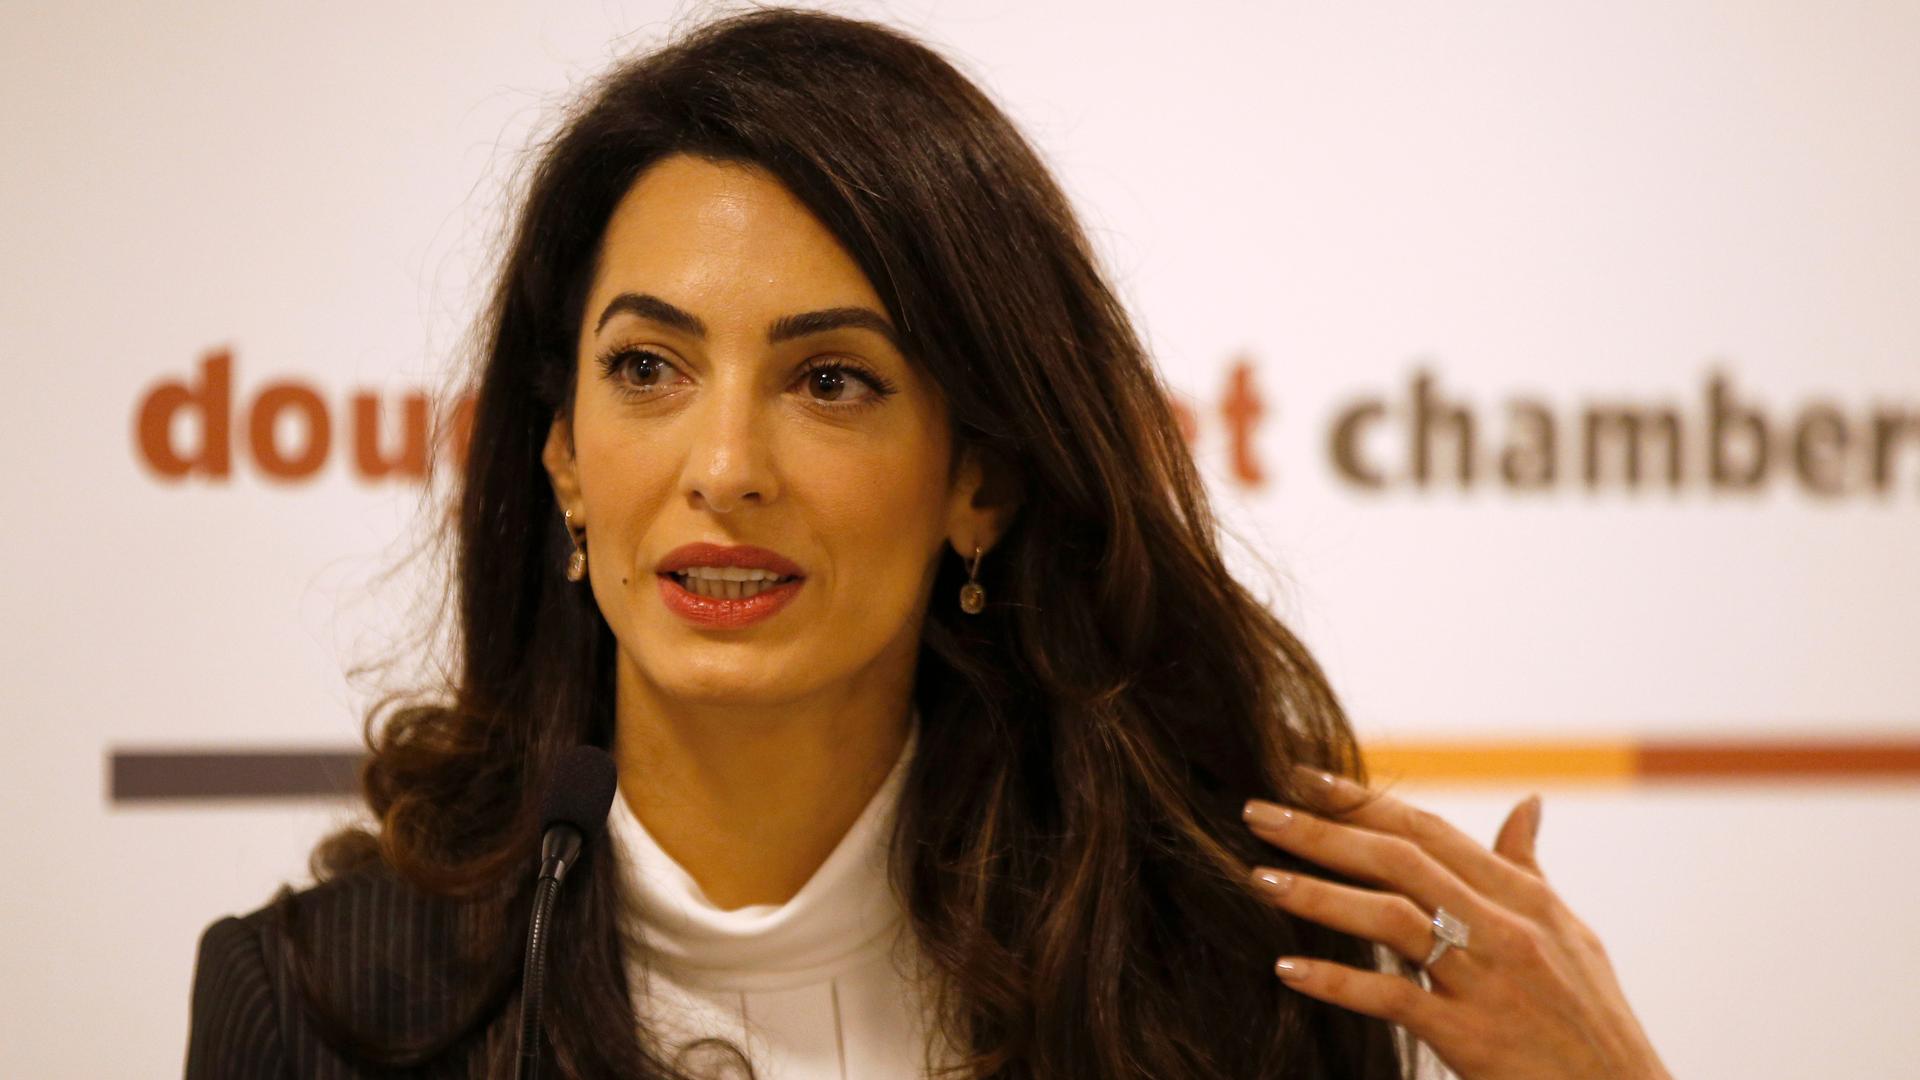 Amal Clooney speaking at recent news conference for another high-profile case